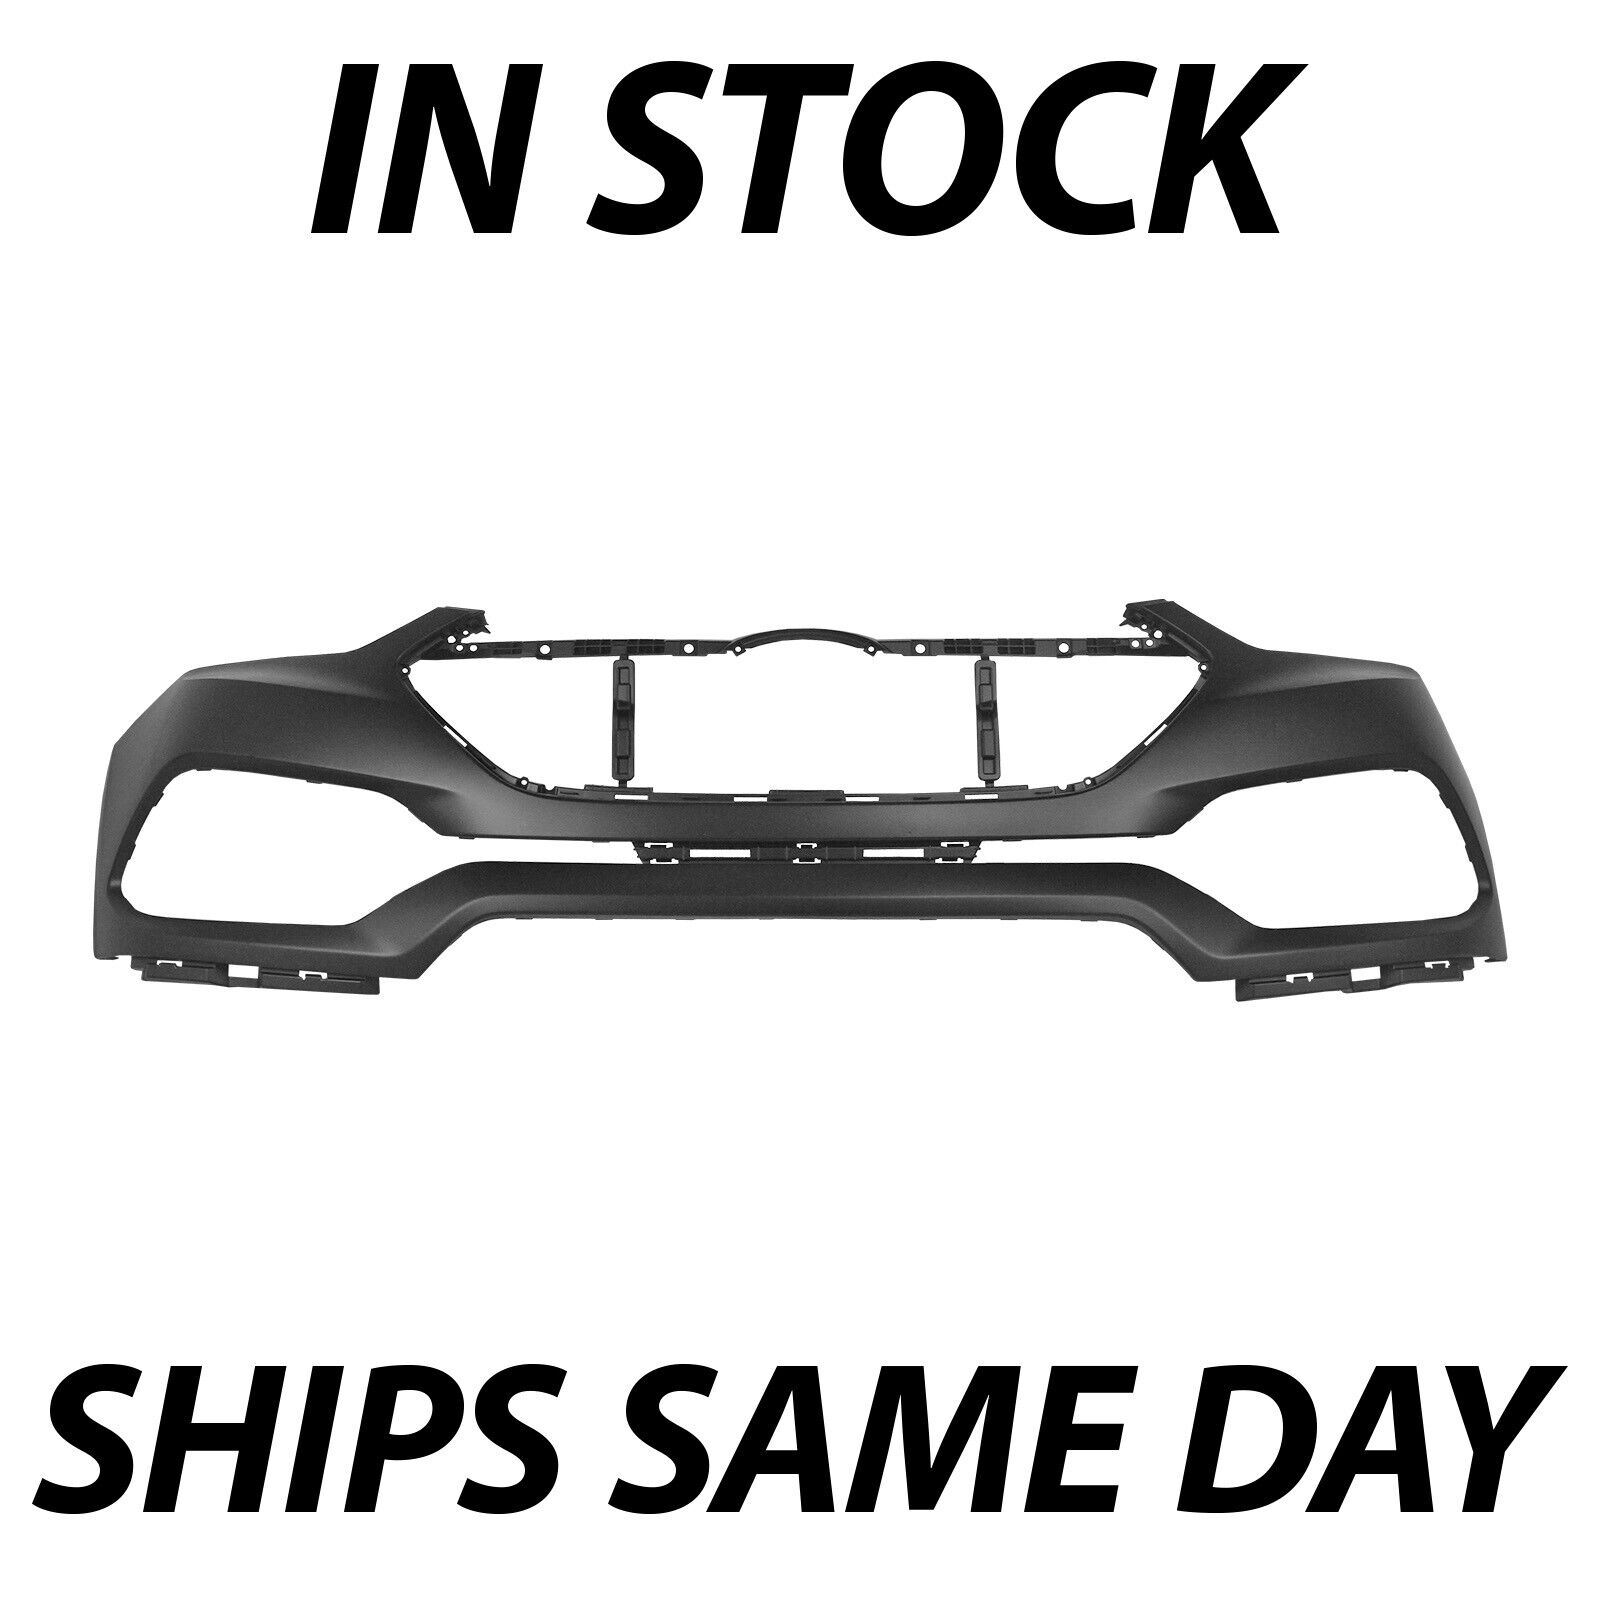 NEW Primered Front Bumper Cover Replacement for 2017 2018 Hyundai Santa Fe Sport